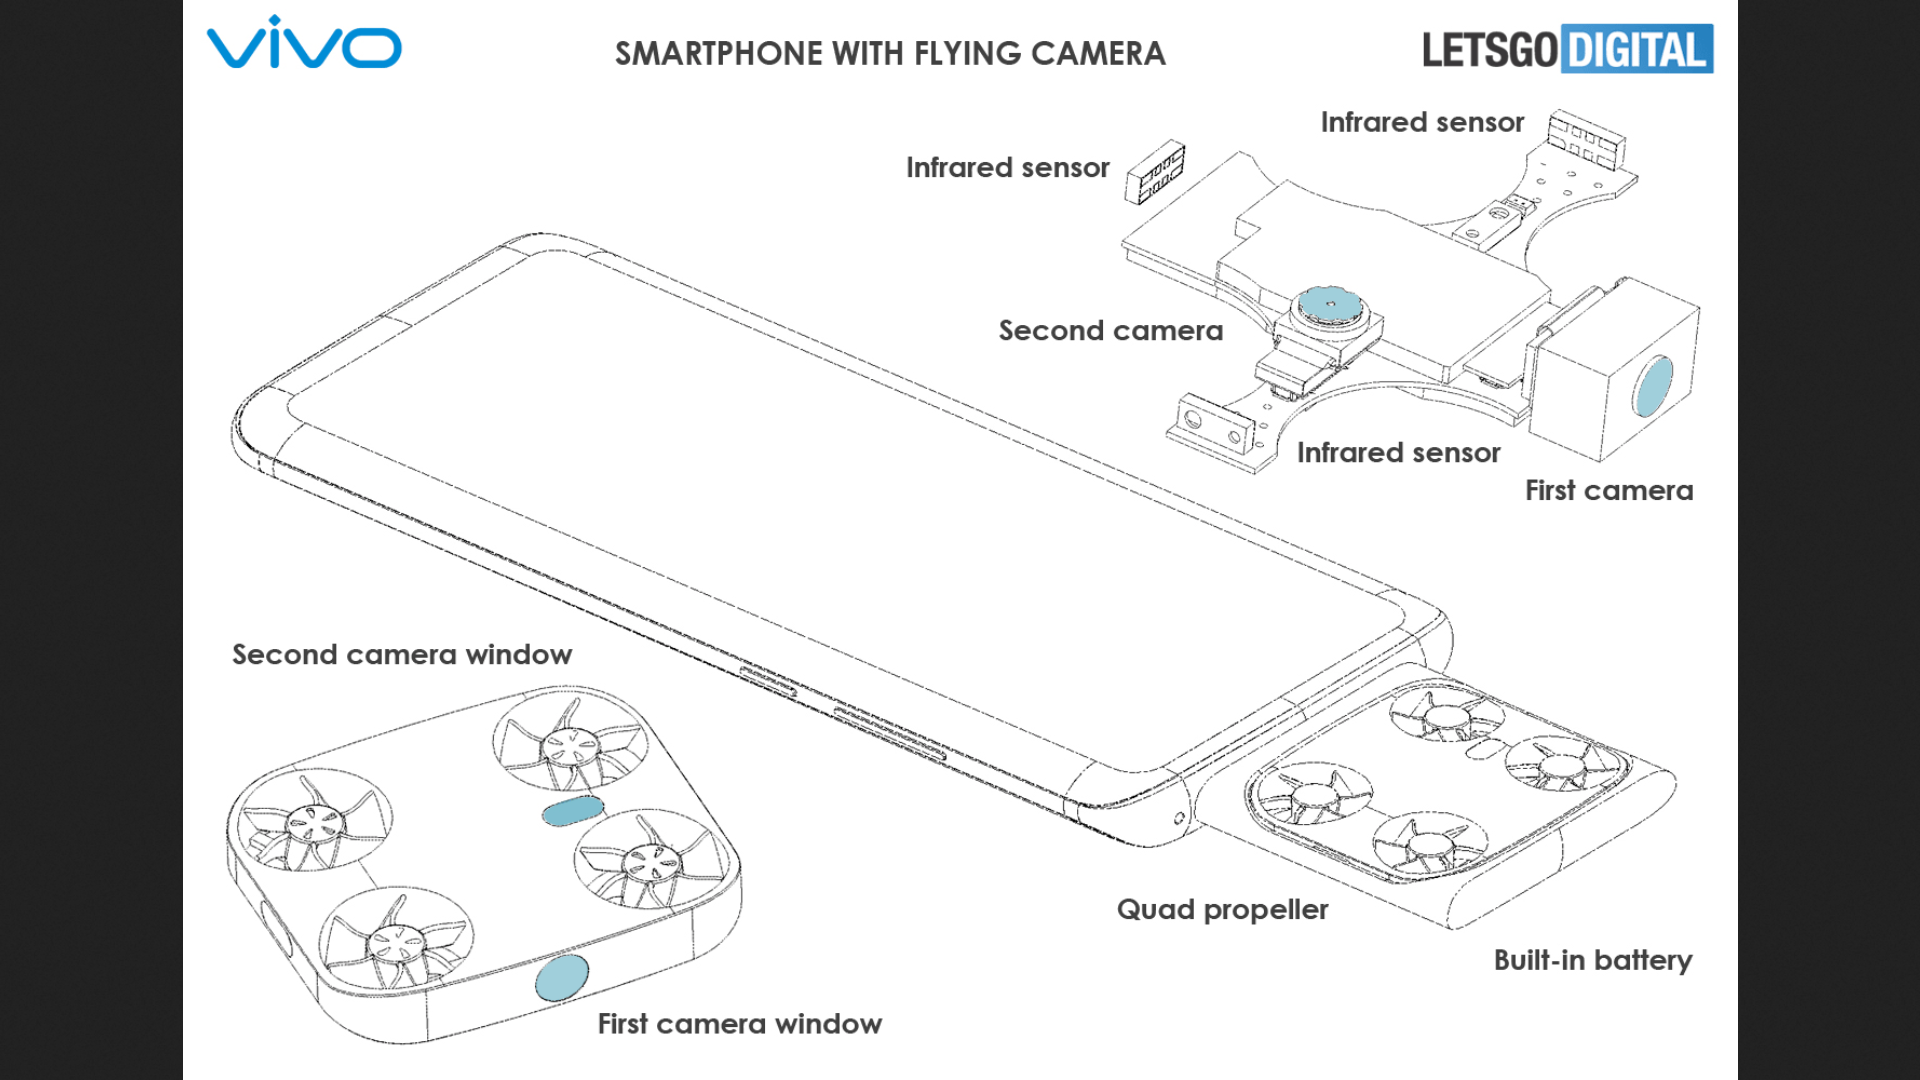 Drone-telephone: Vivo patents a telephone with a little removable UAV